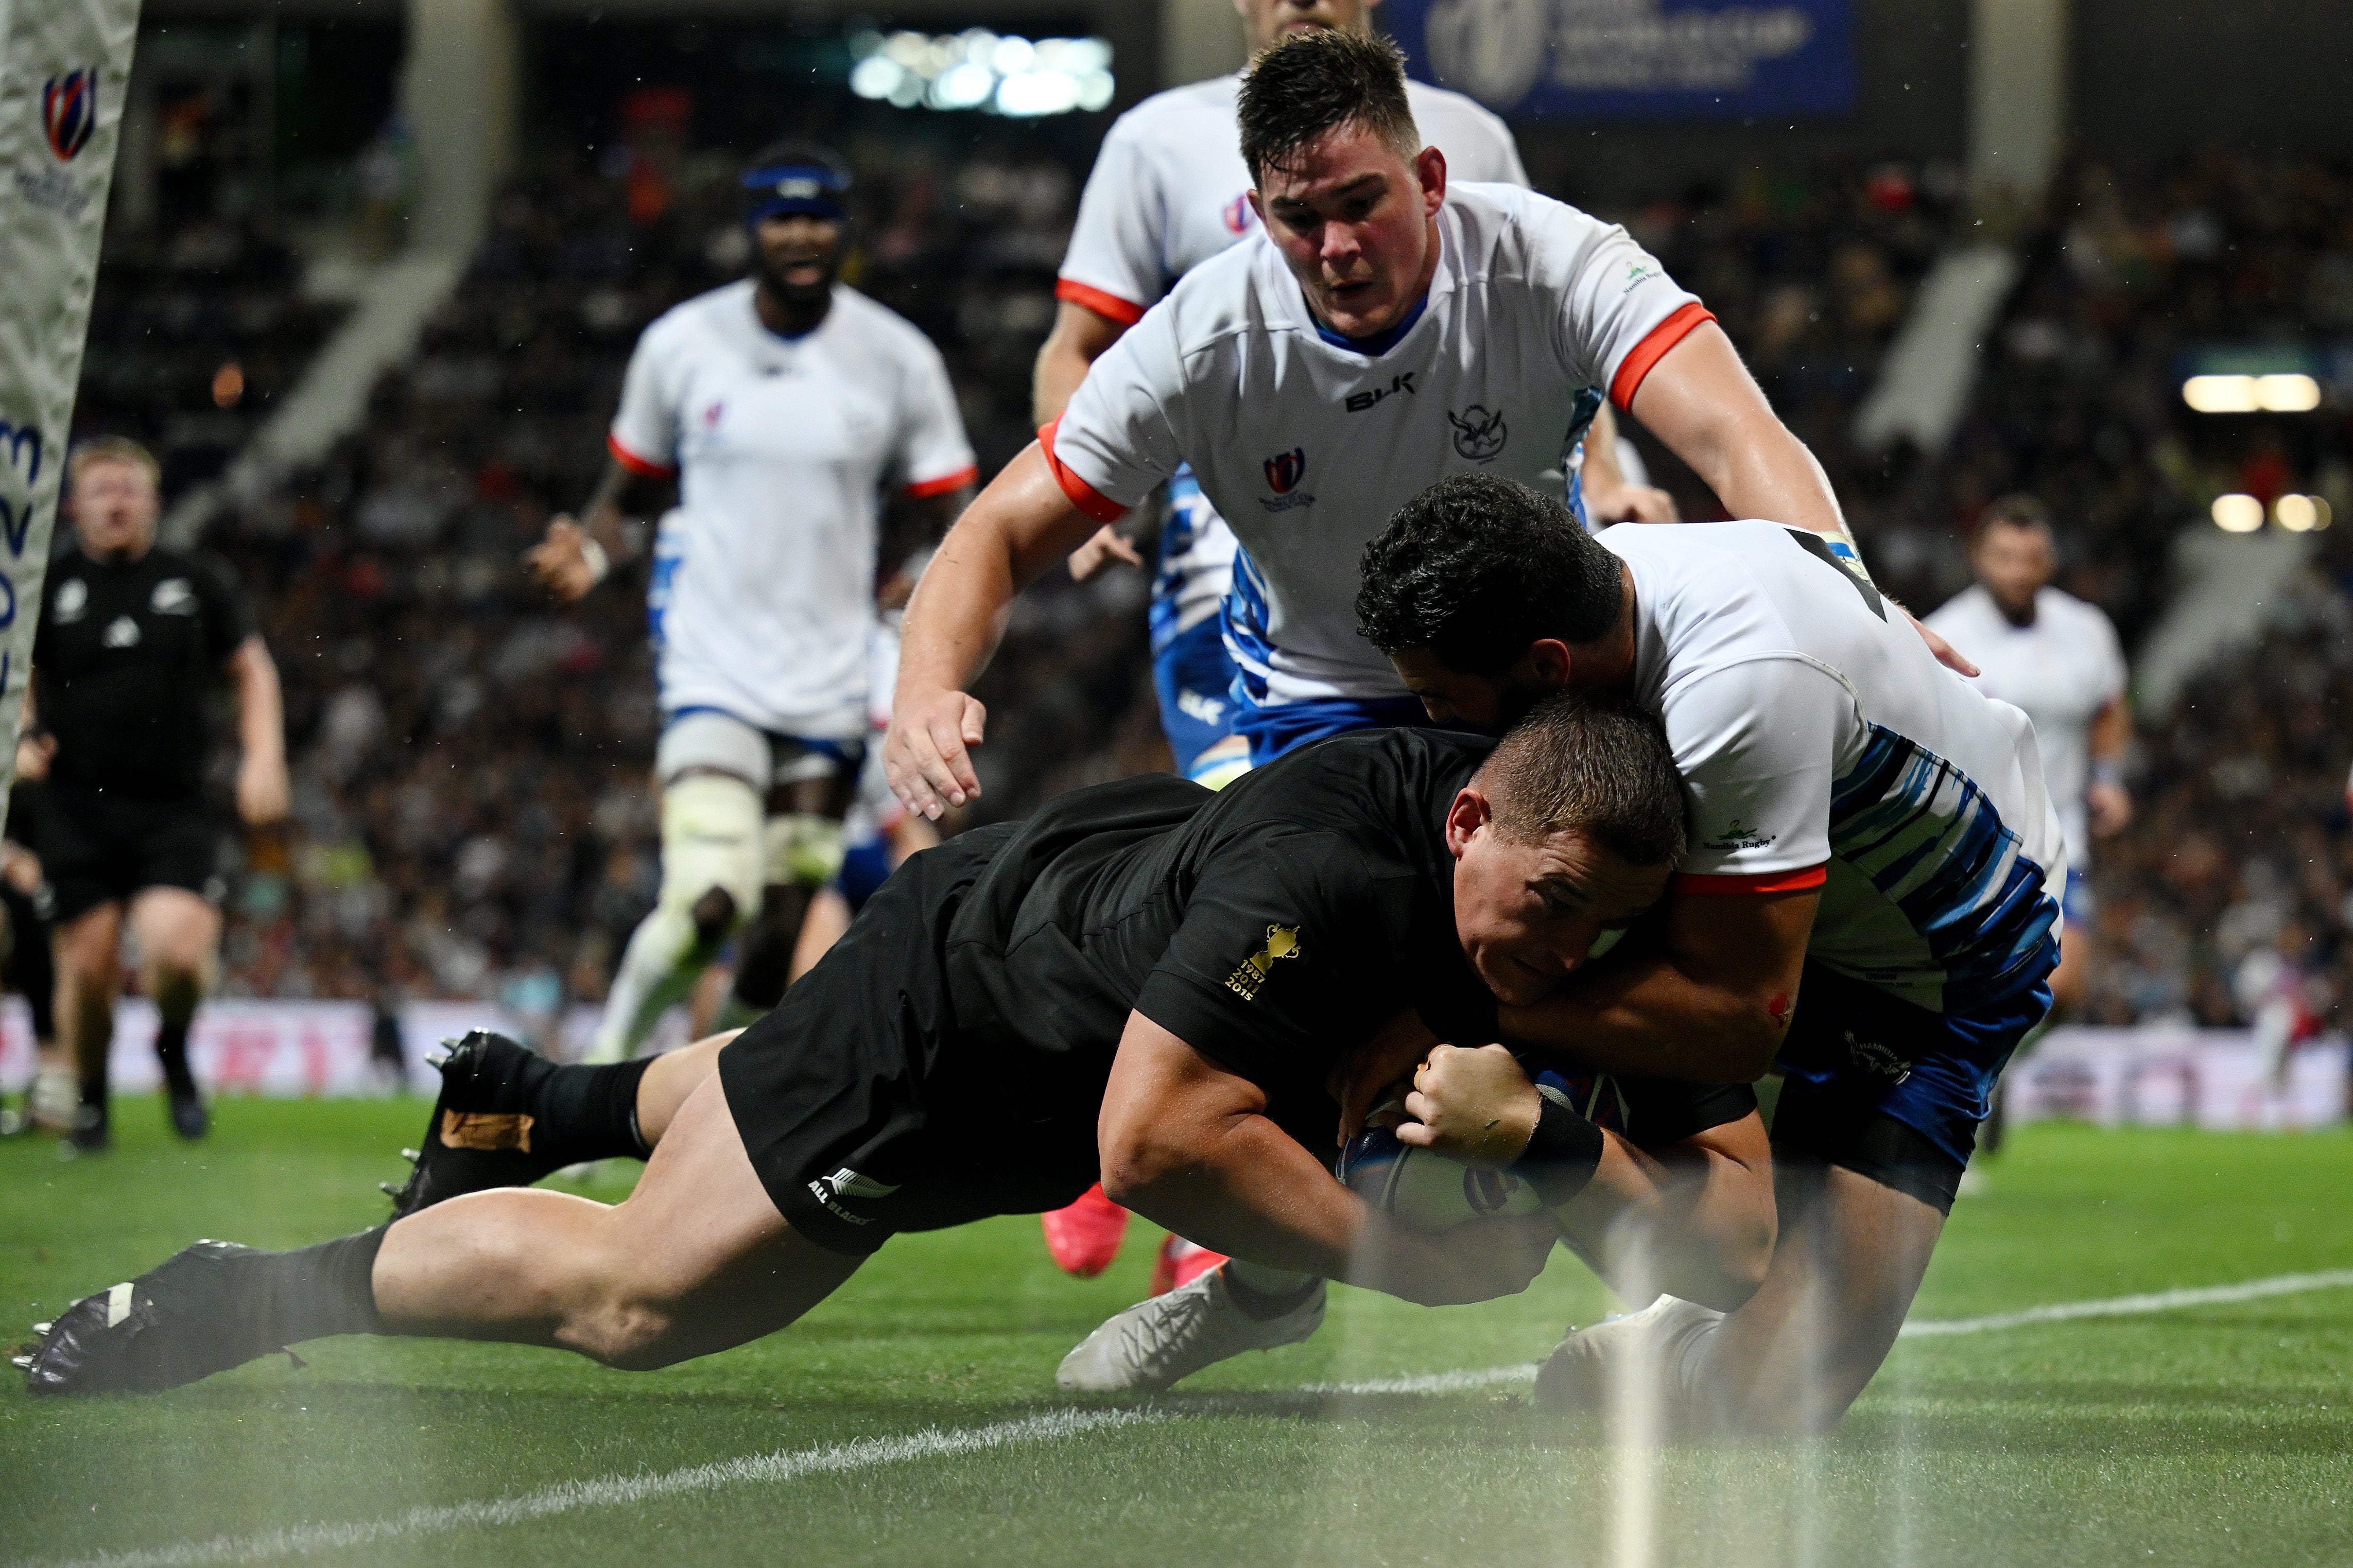 Ethan de Groot scored New Zealand’s seventh try before being sent off just before the end of the game